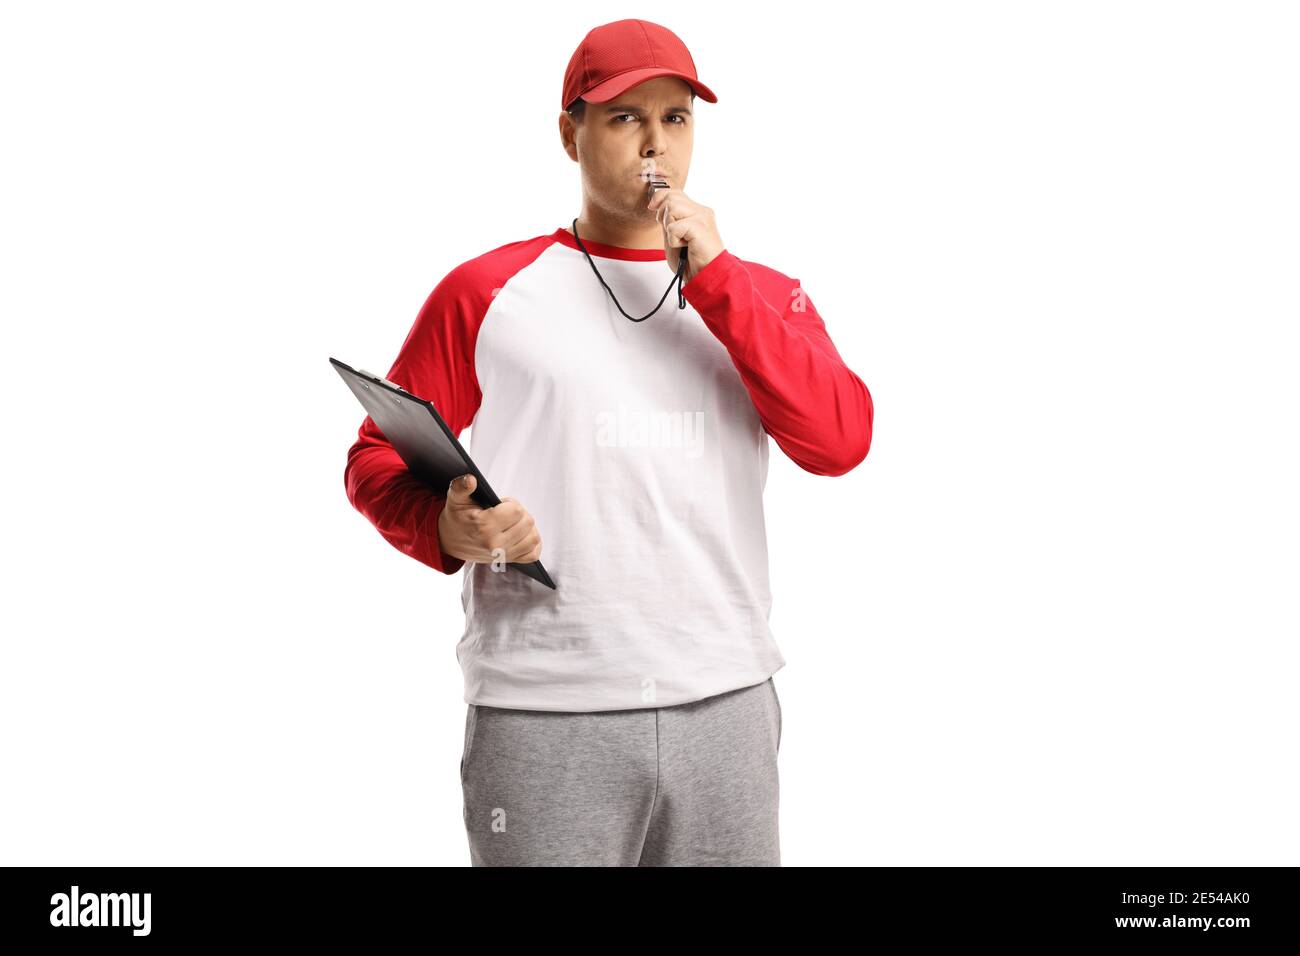 Angry baseball coach holding a clipboard and blowing a whistle isolated on white background Stock Photo